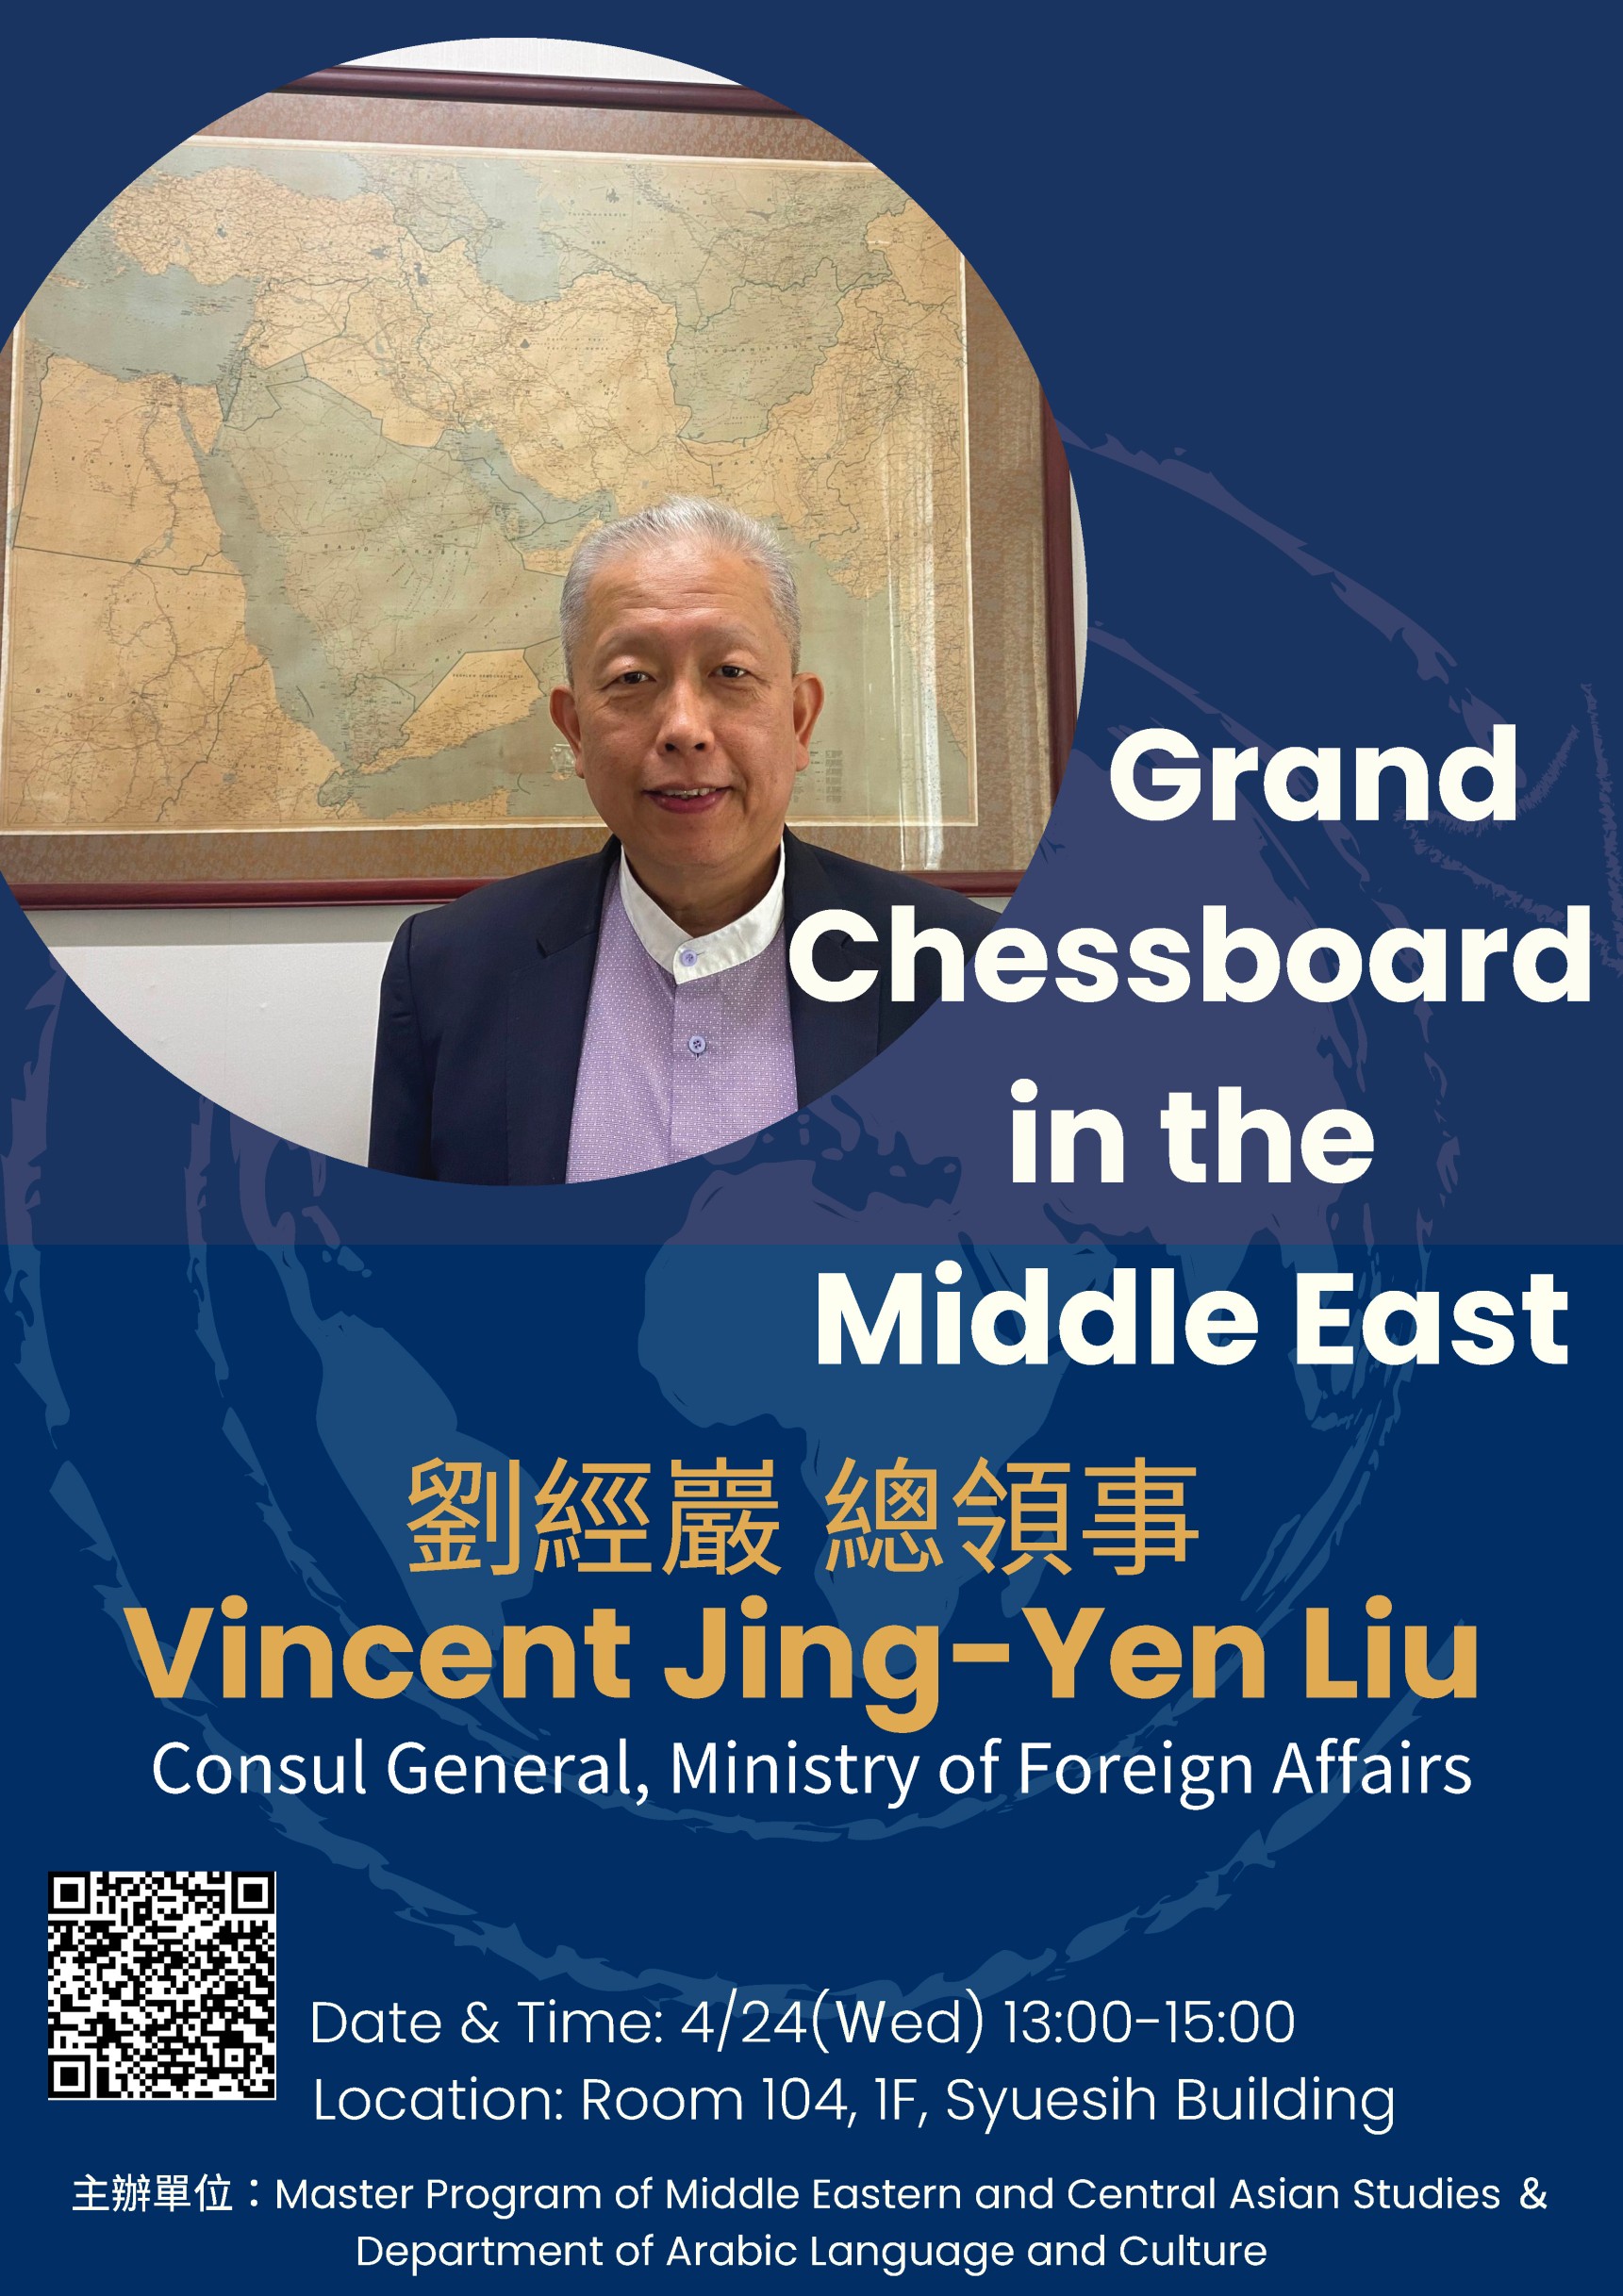 Public Speaking from Council General Liu-Grand Chessboard in the Middle East